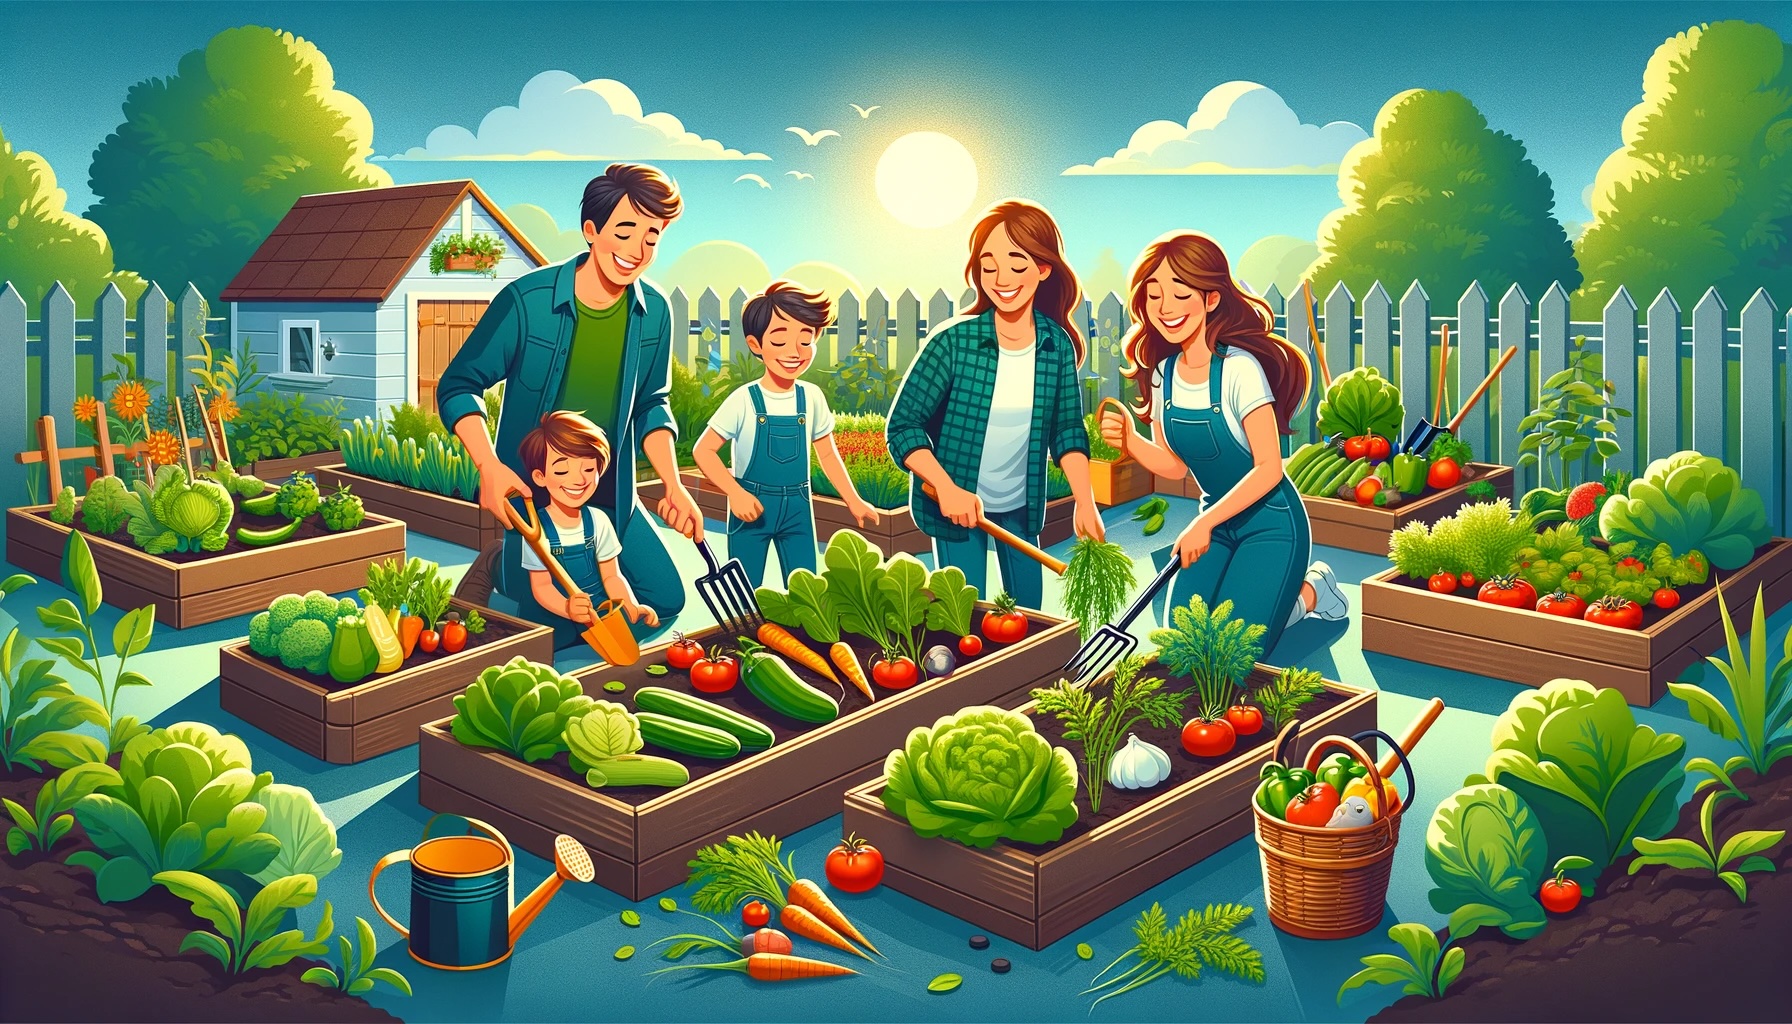 Creating a Family Garden- Tips for Growing Your Own Vegetables